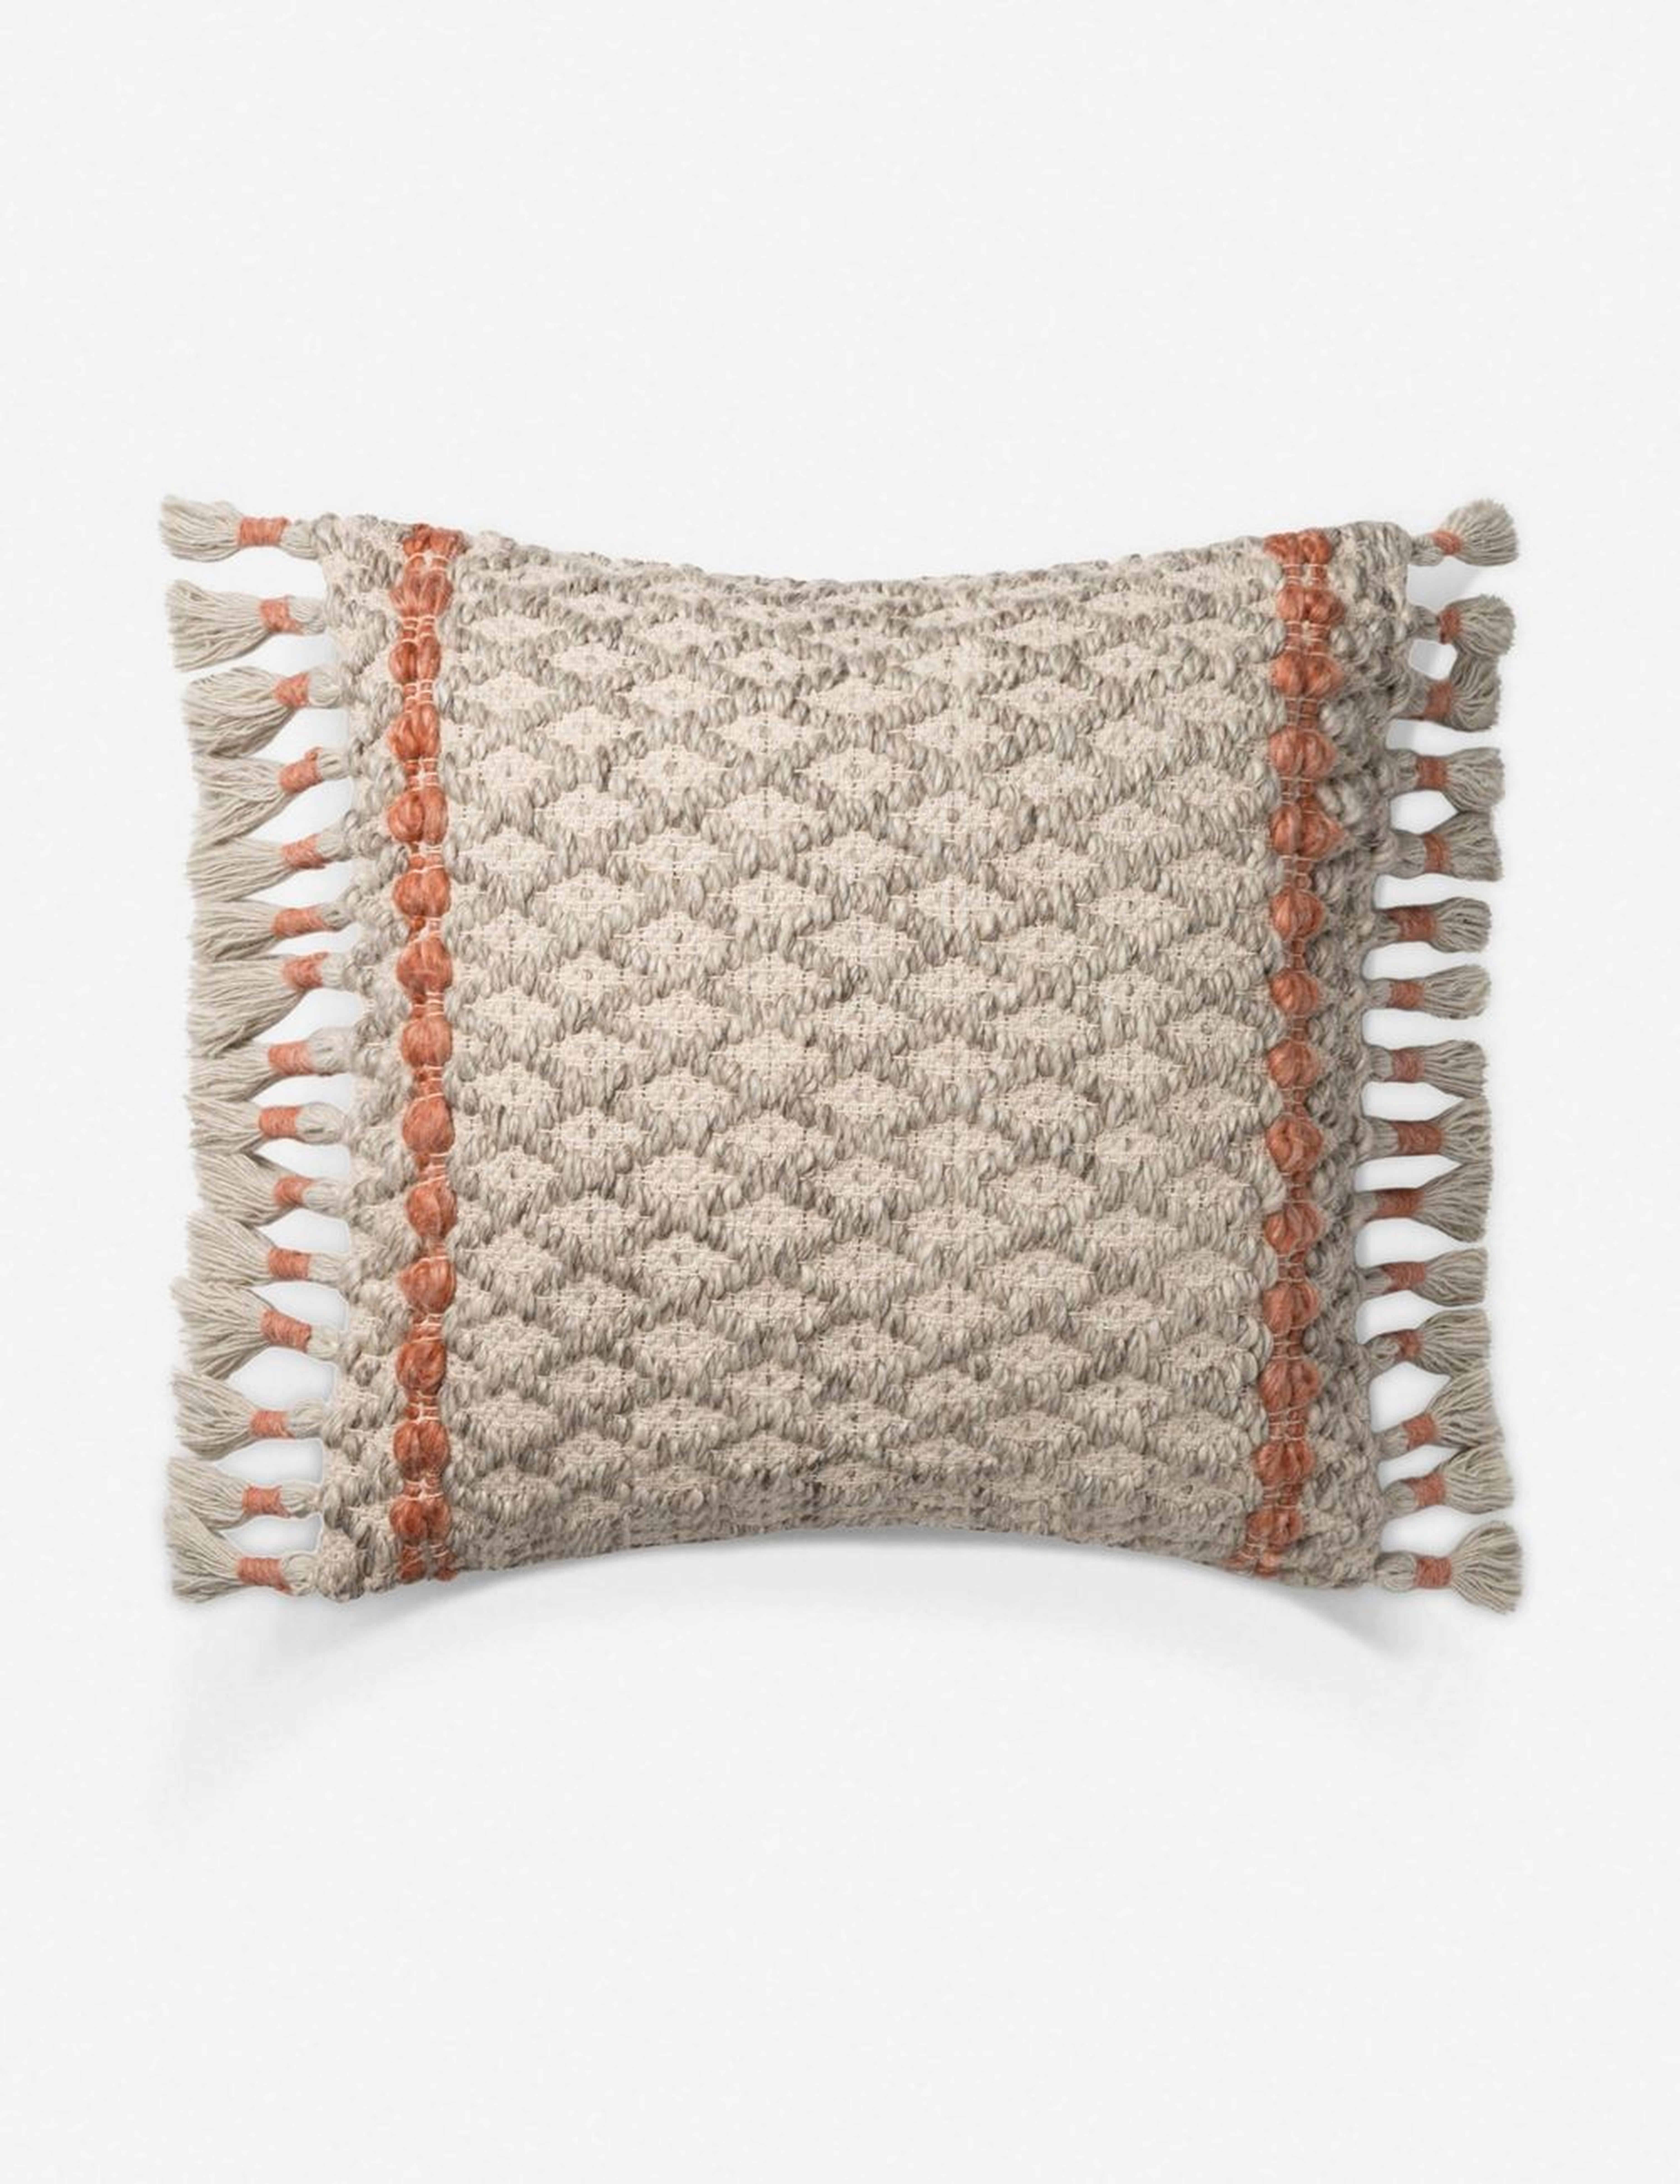 CHELLES PILLOW, GRAY AND RUST, w/ poly insert - Lulu and Georgia